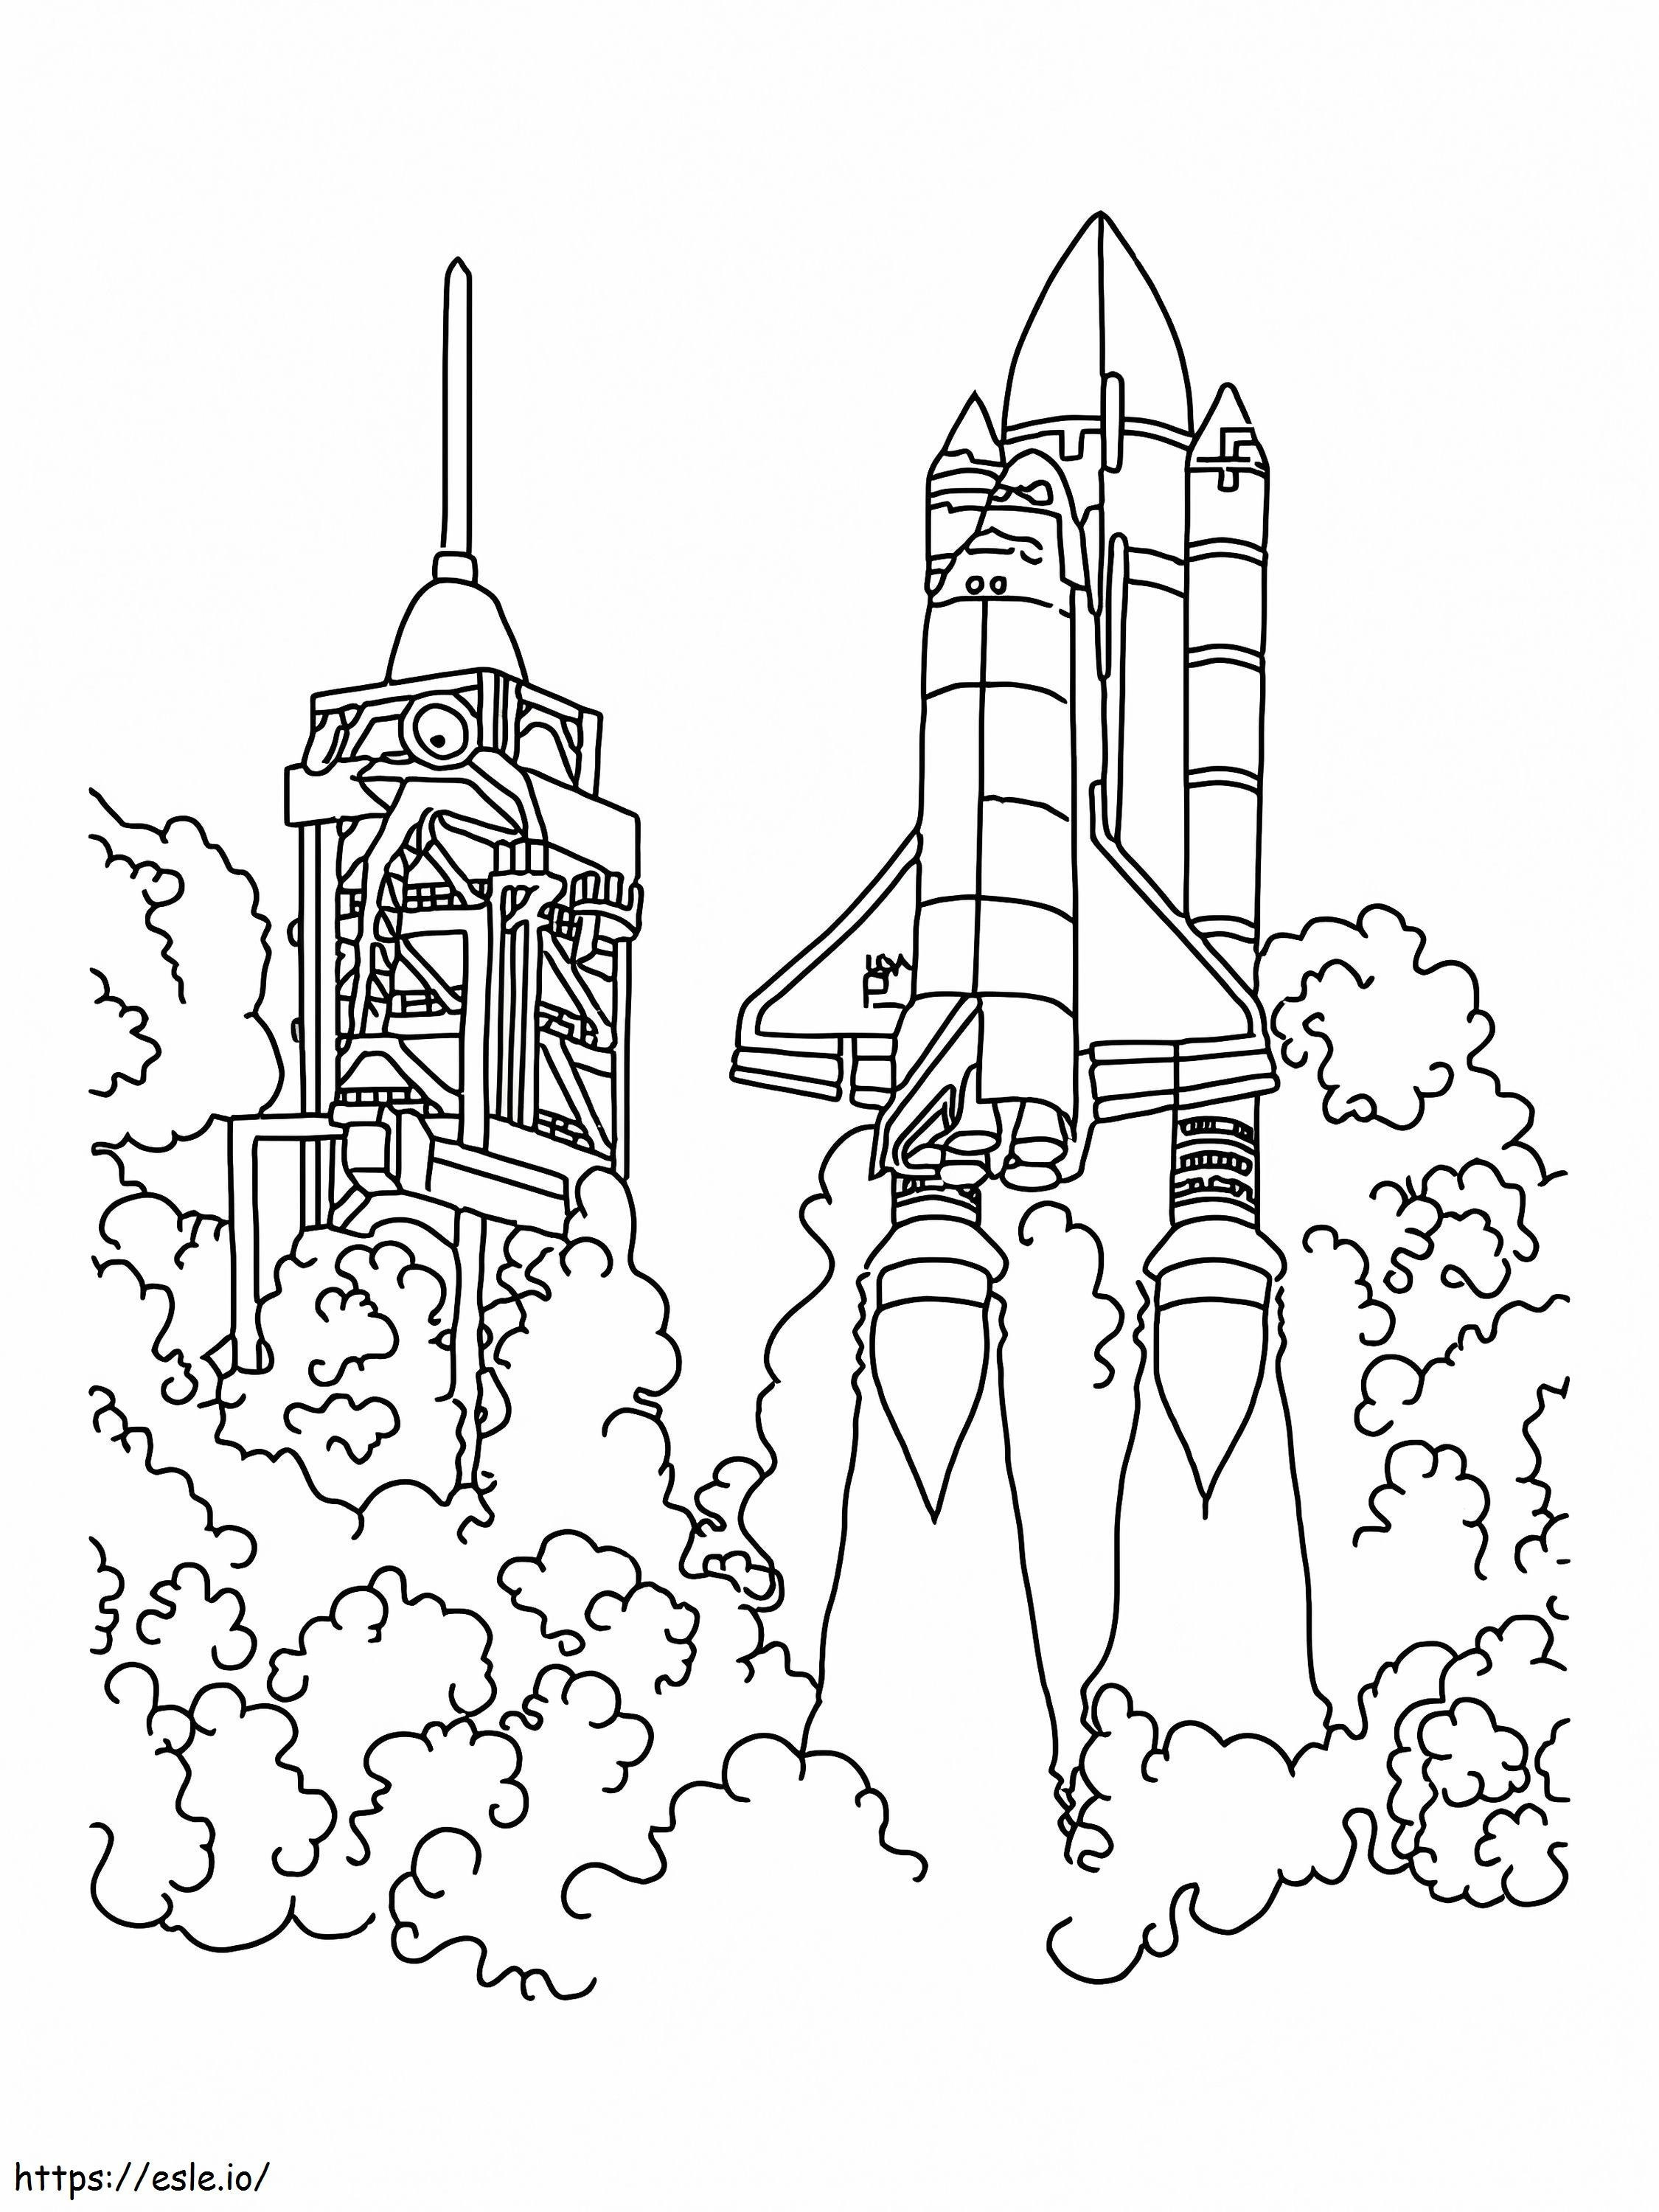 In The Rocket coloring page